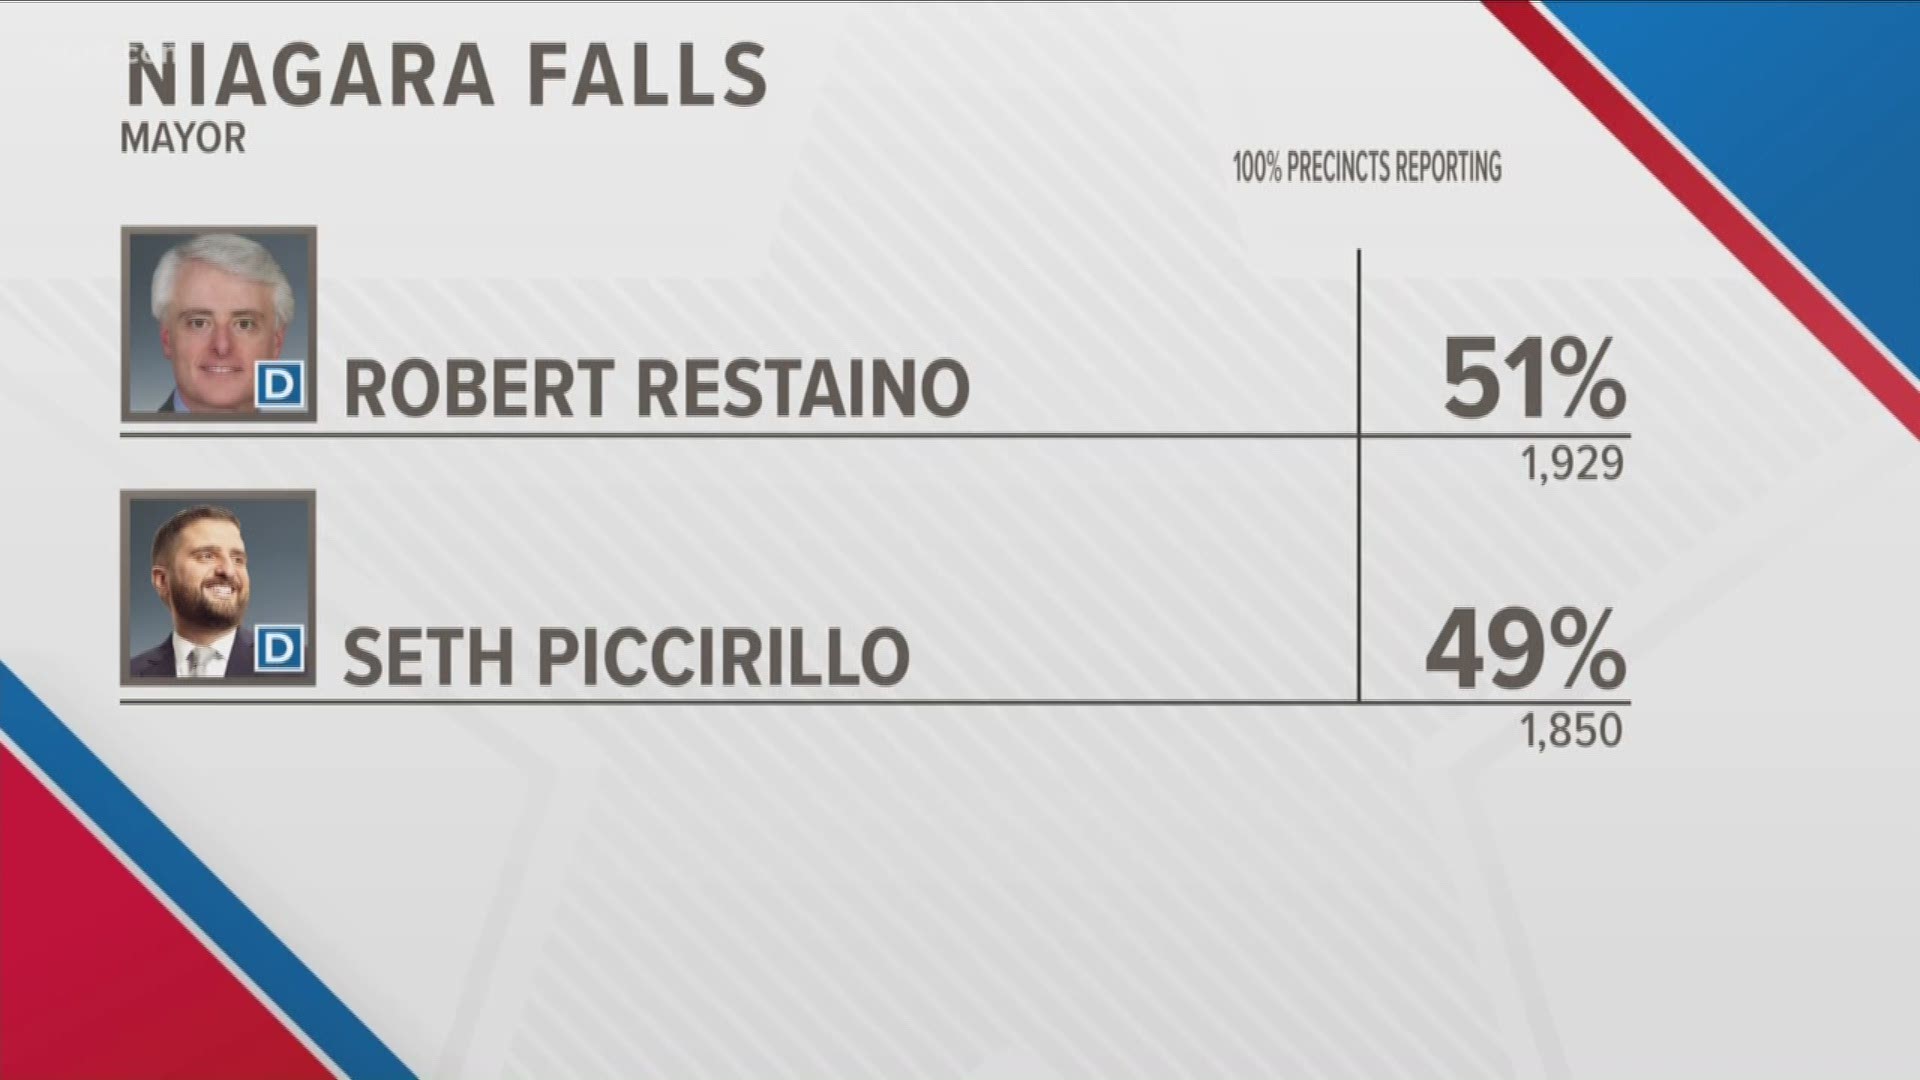 The Democratic primary race is too close to call in the City of Niagara Falls.